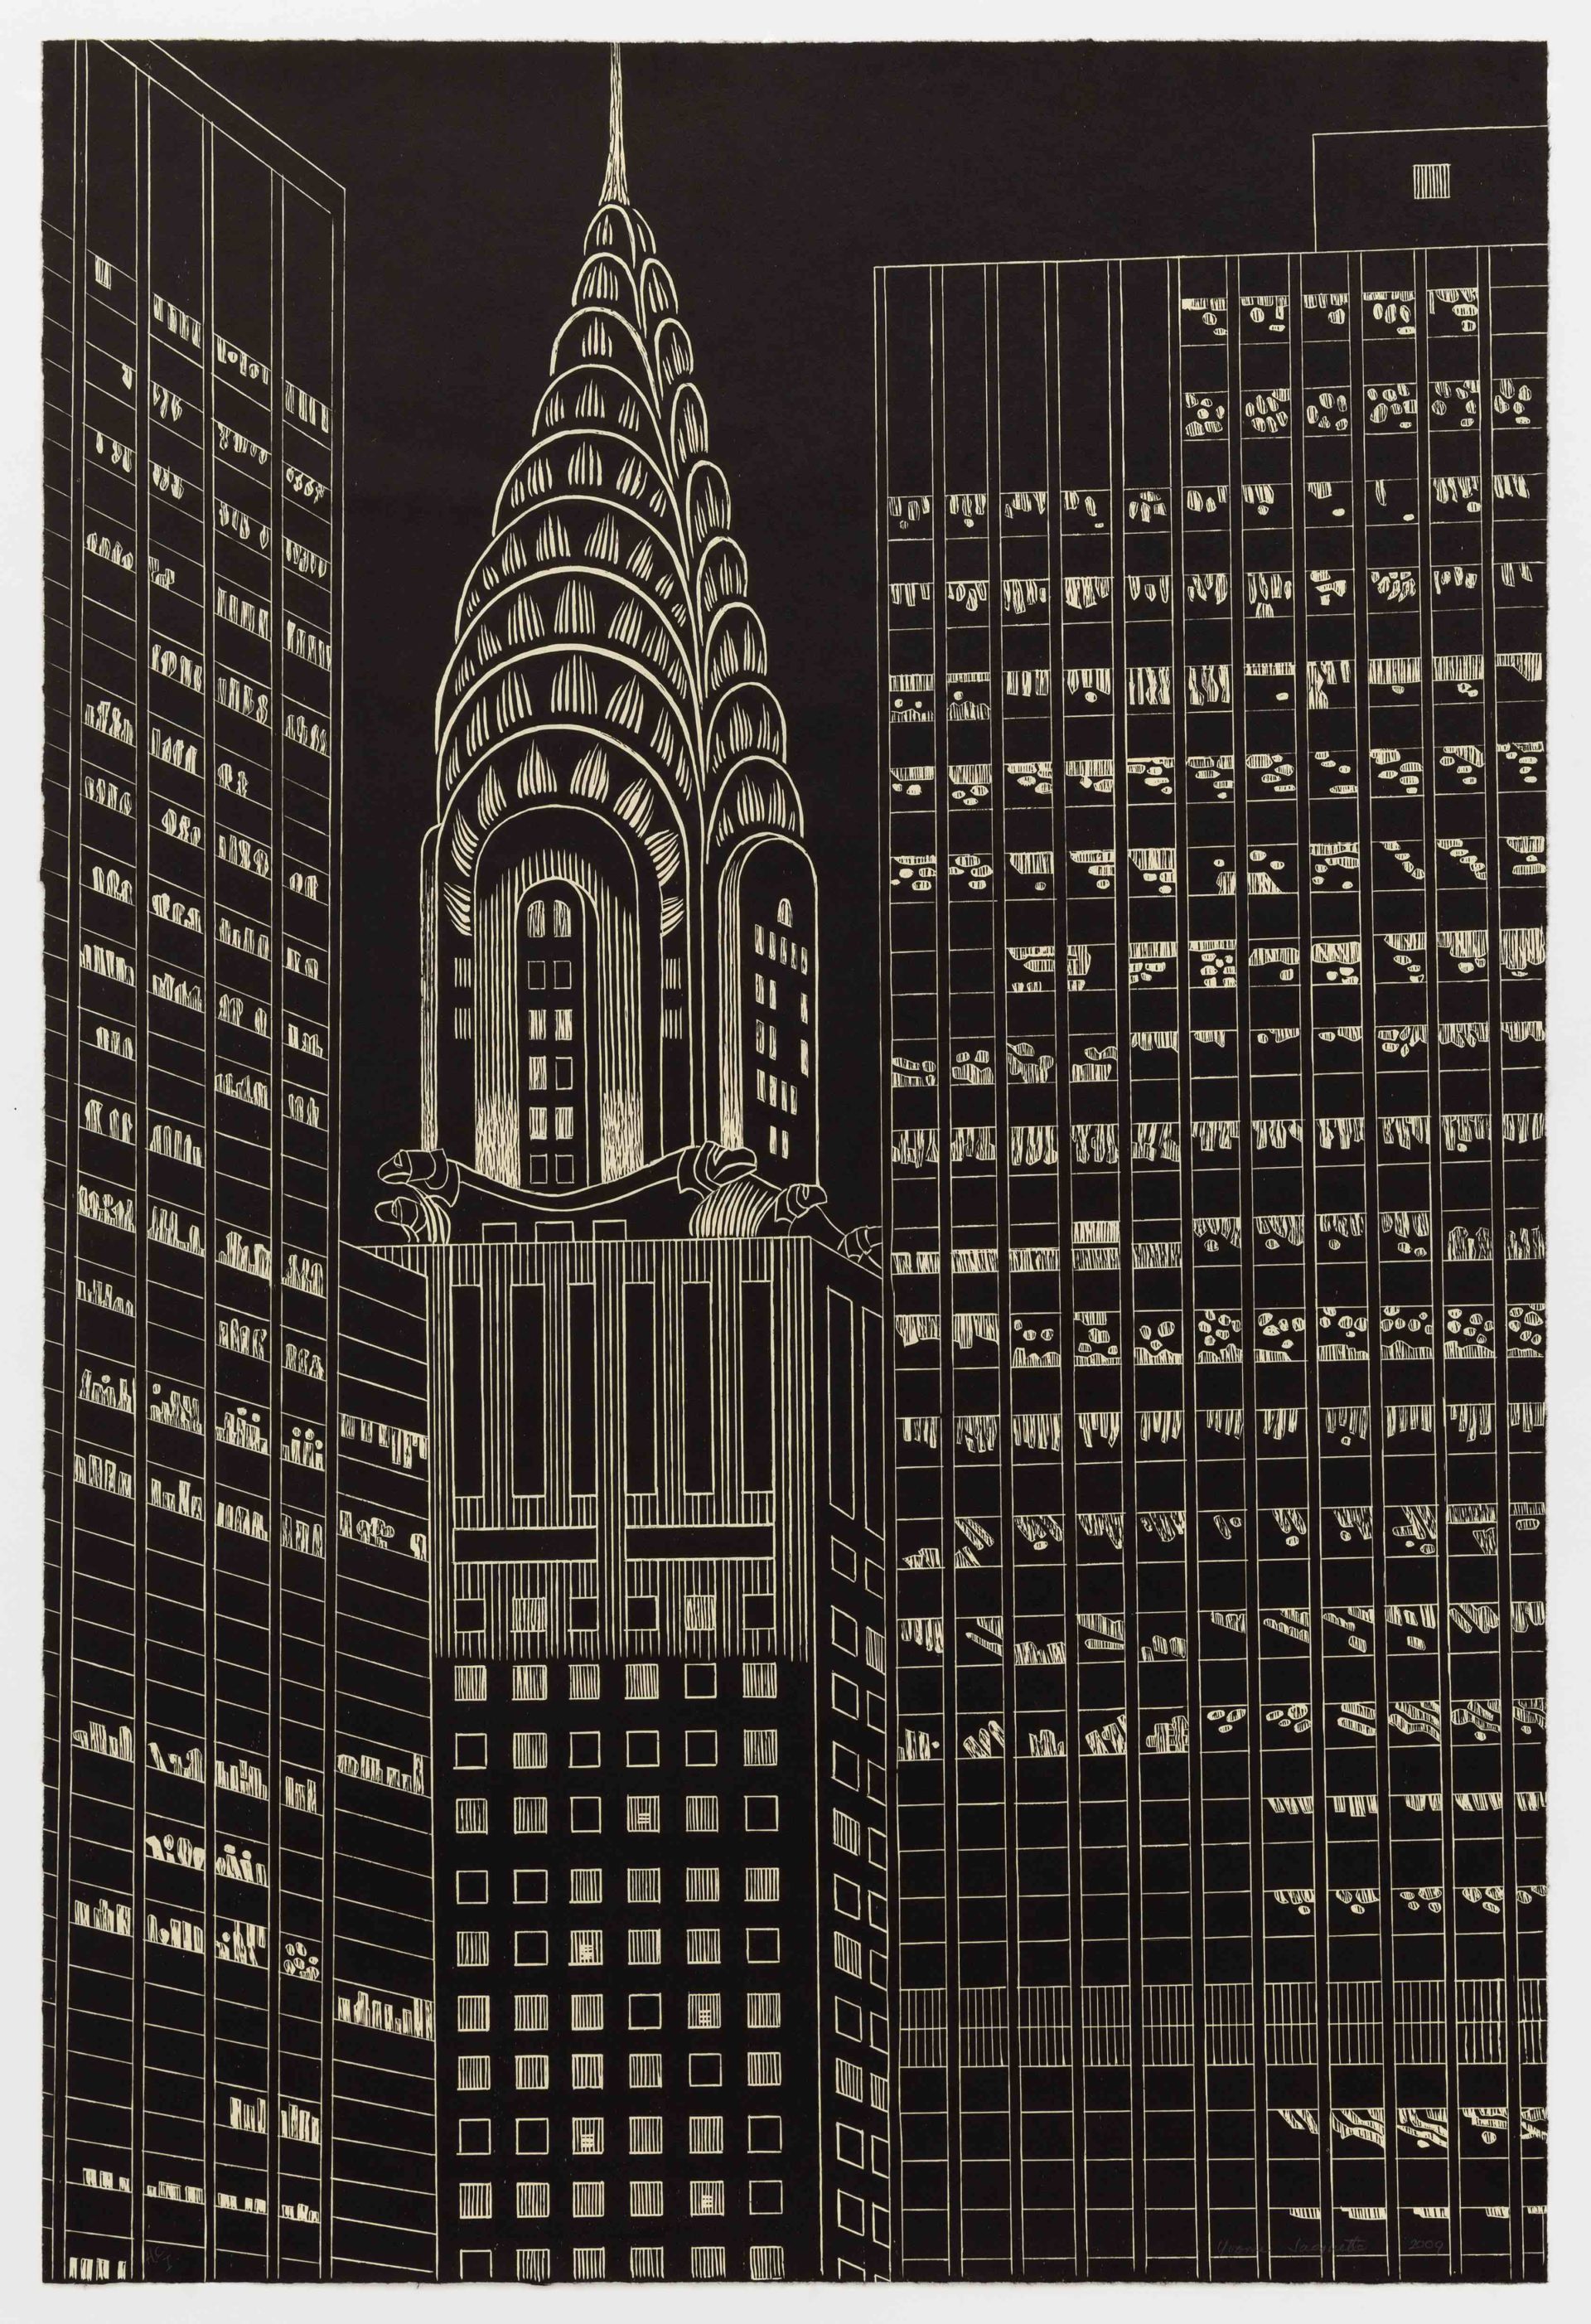 Chrysler Building Flanked by High Rise Buildings, II, 2009, Woodcut, 35 5/8 x 23 1/2 inches (90.4 x 59.7 cm), Edition of 75